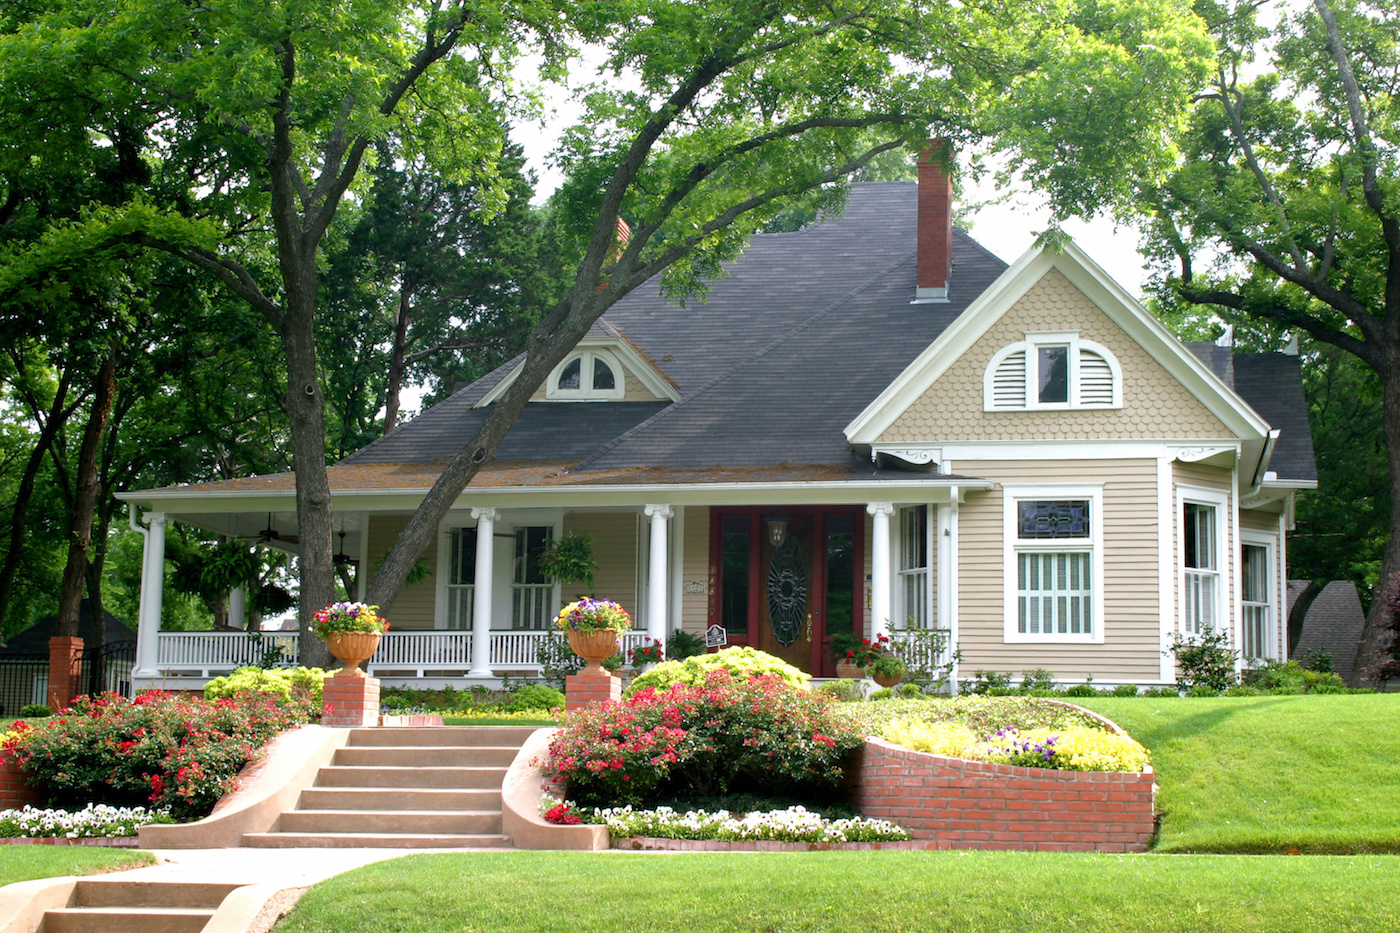 Classic House with flower garden